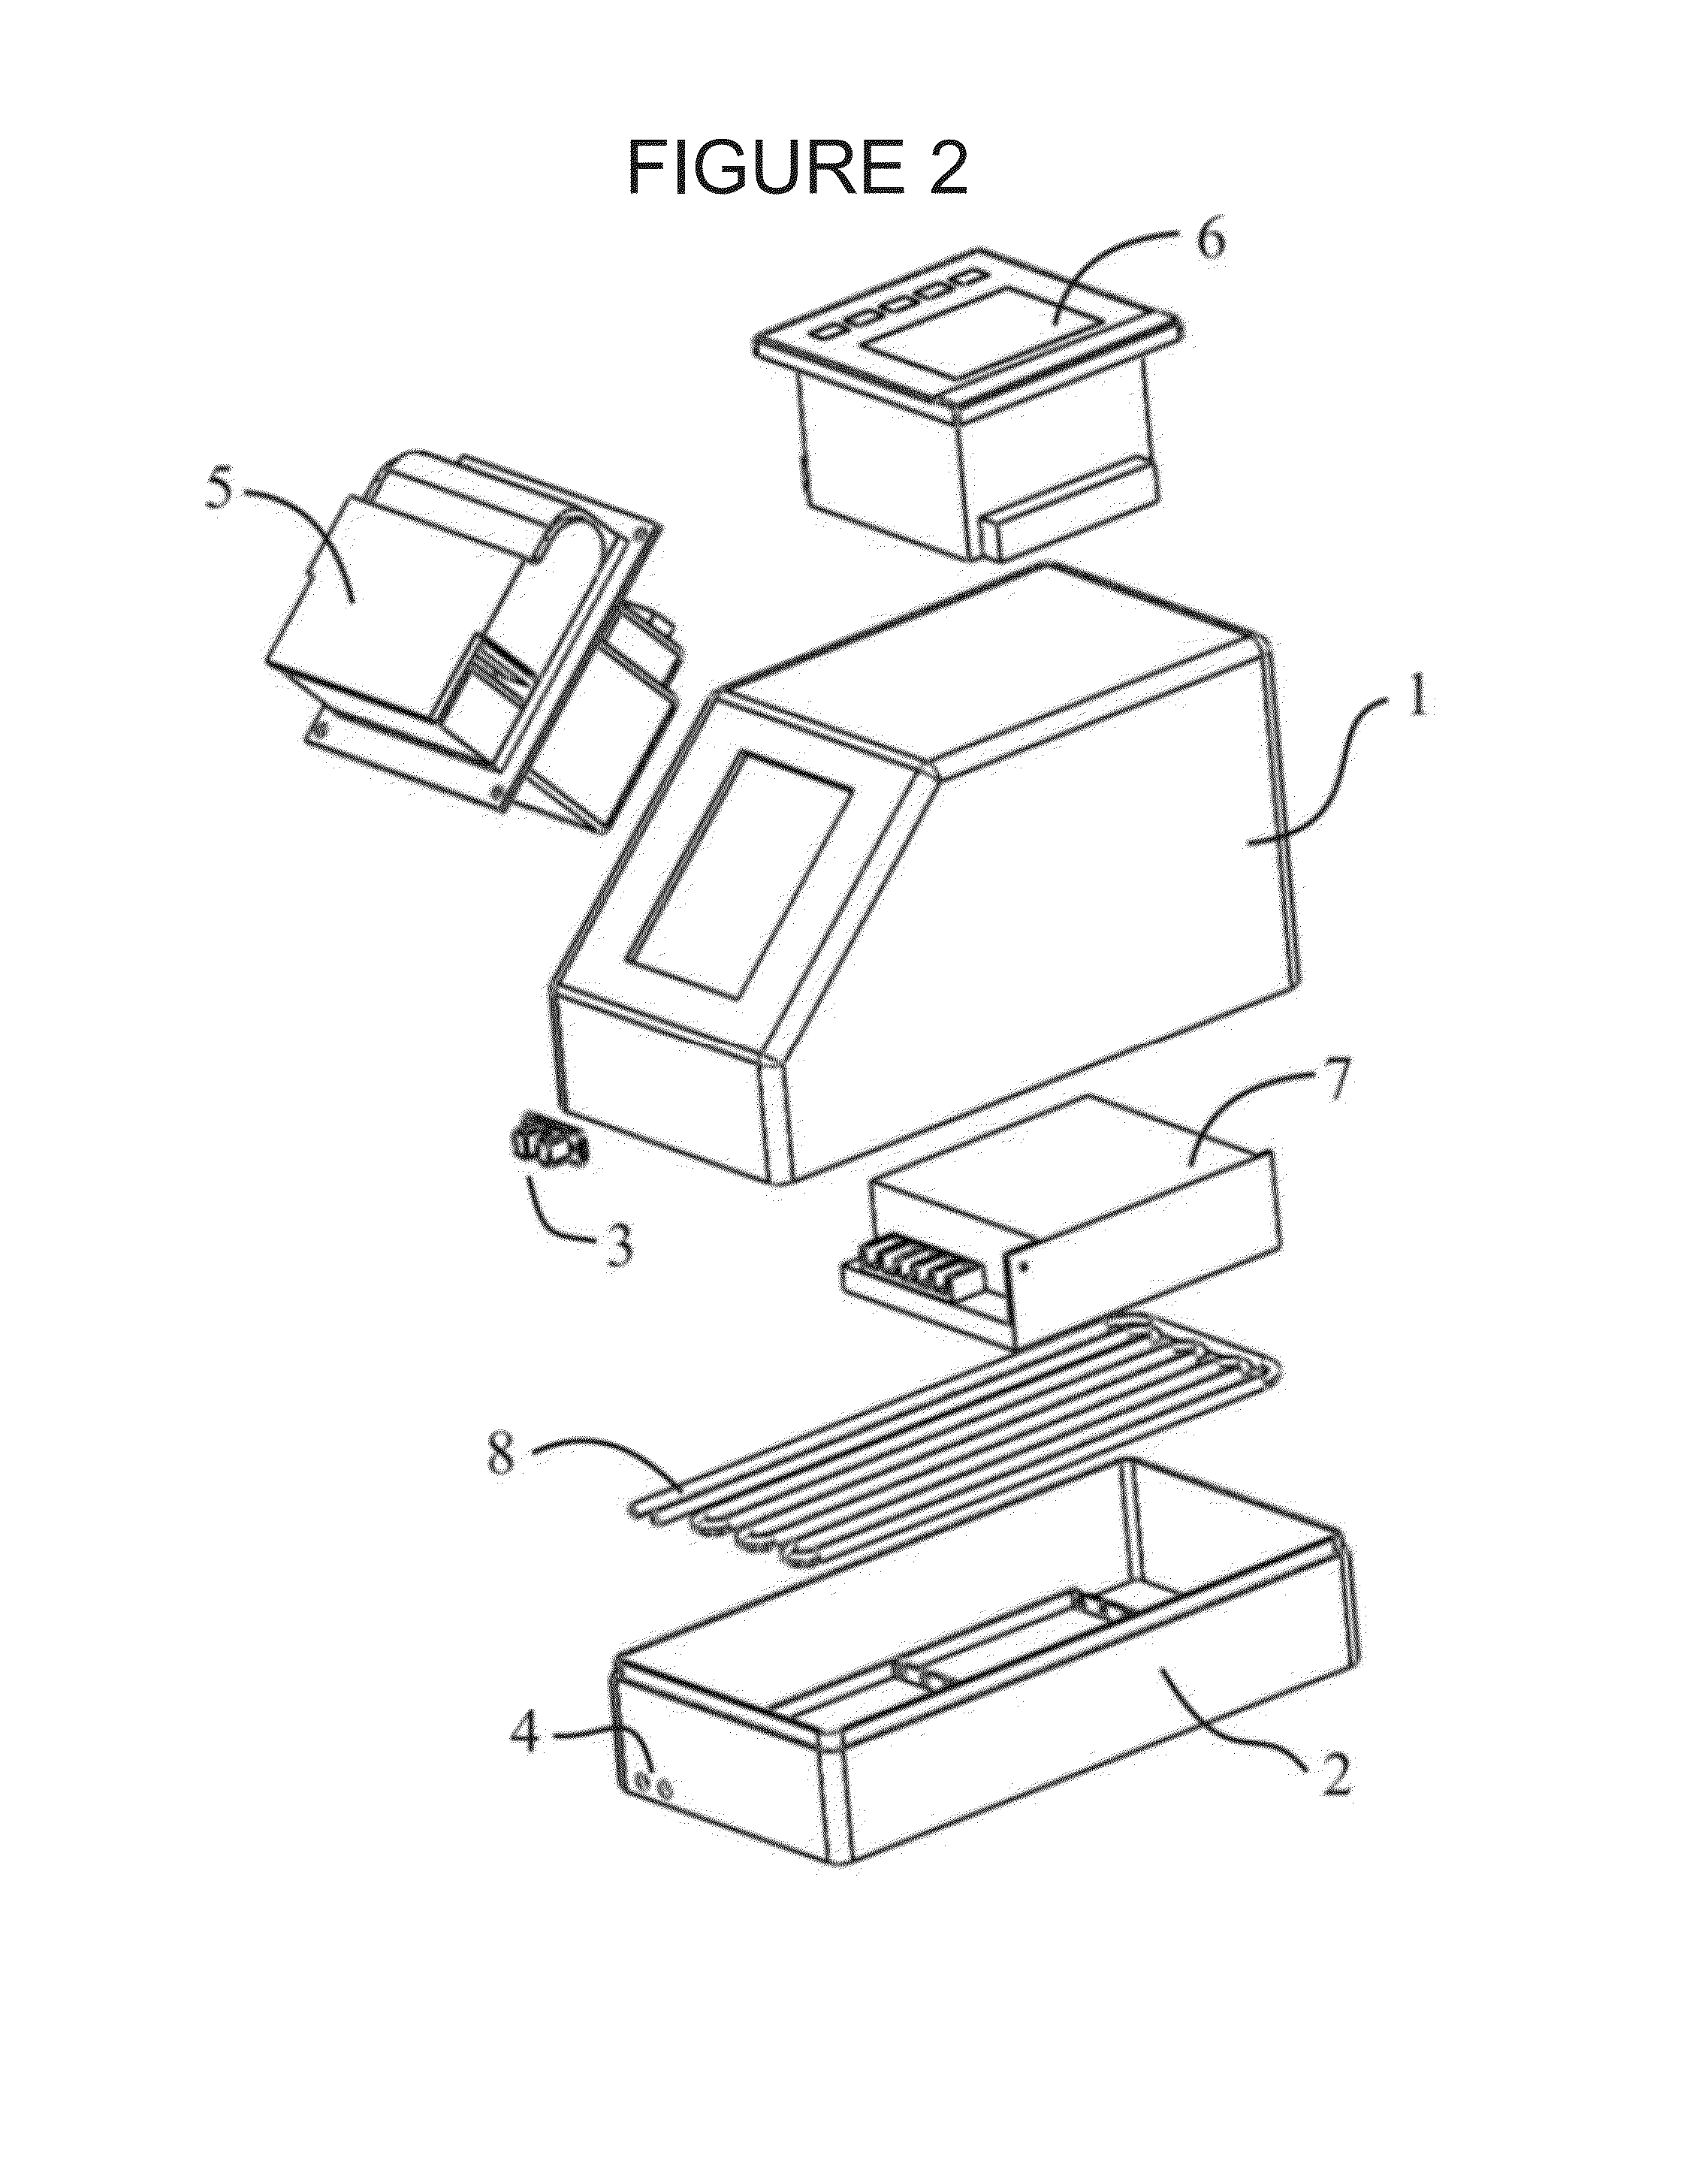 Apparatus for treatment of reperfusion injury